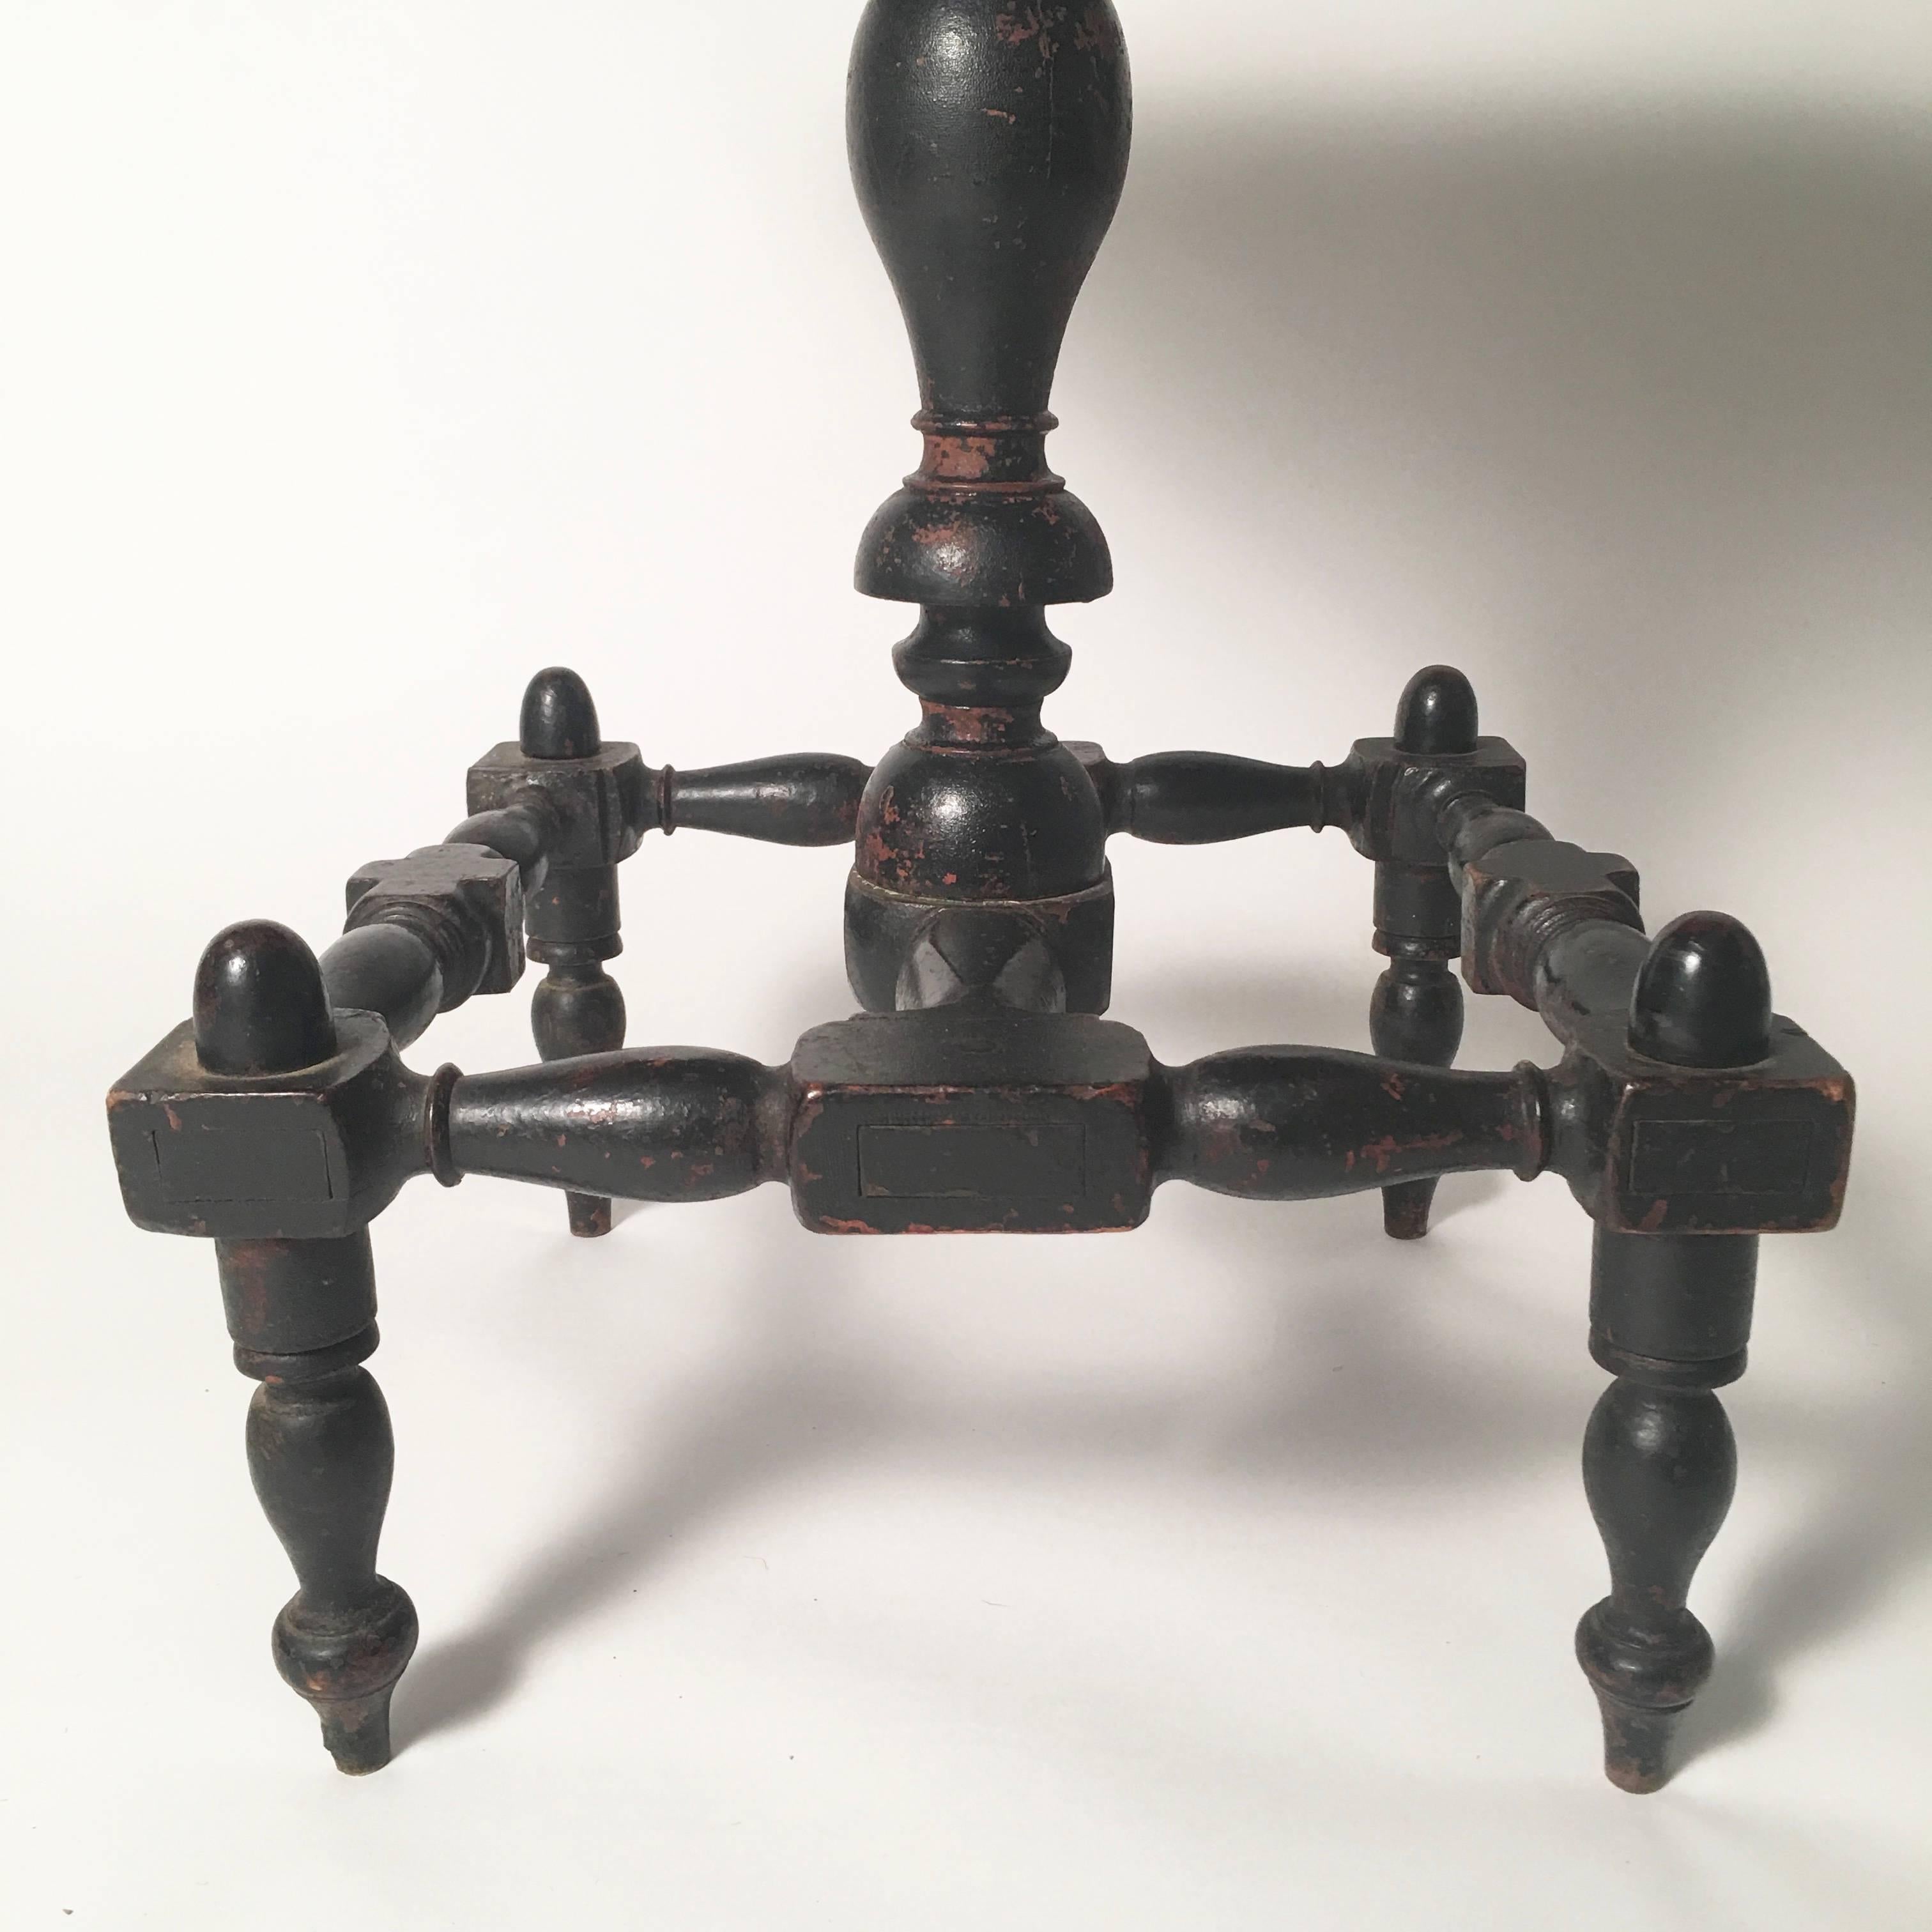 An unusual, sculptural early 19th century American occasional table, in ebonized pine and tiger maple, New England, circa 1820-1830, the square top with ovolu corners over a drawer mounted on the underside, threaded onto a vase- and ring-turned post